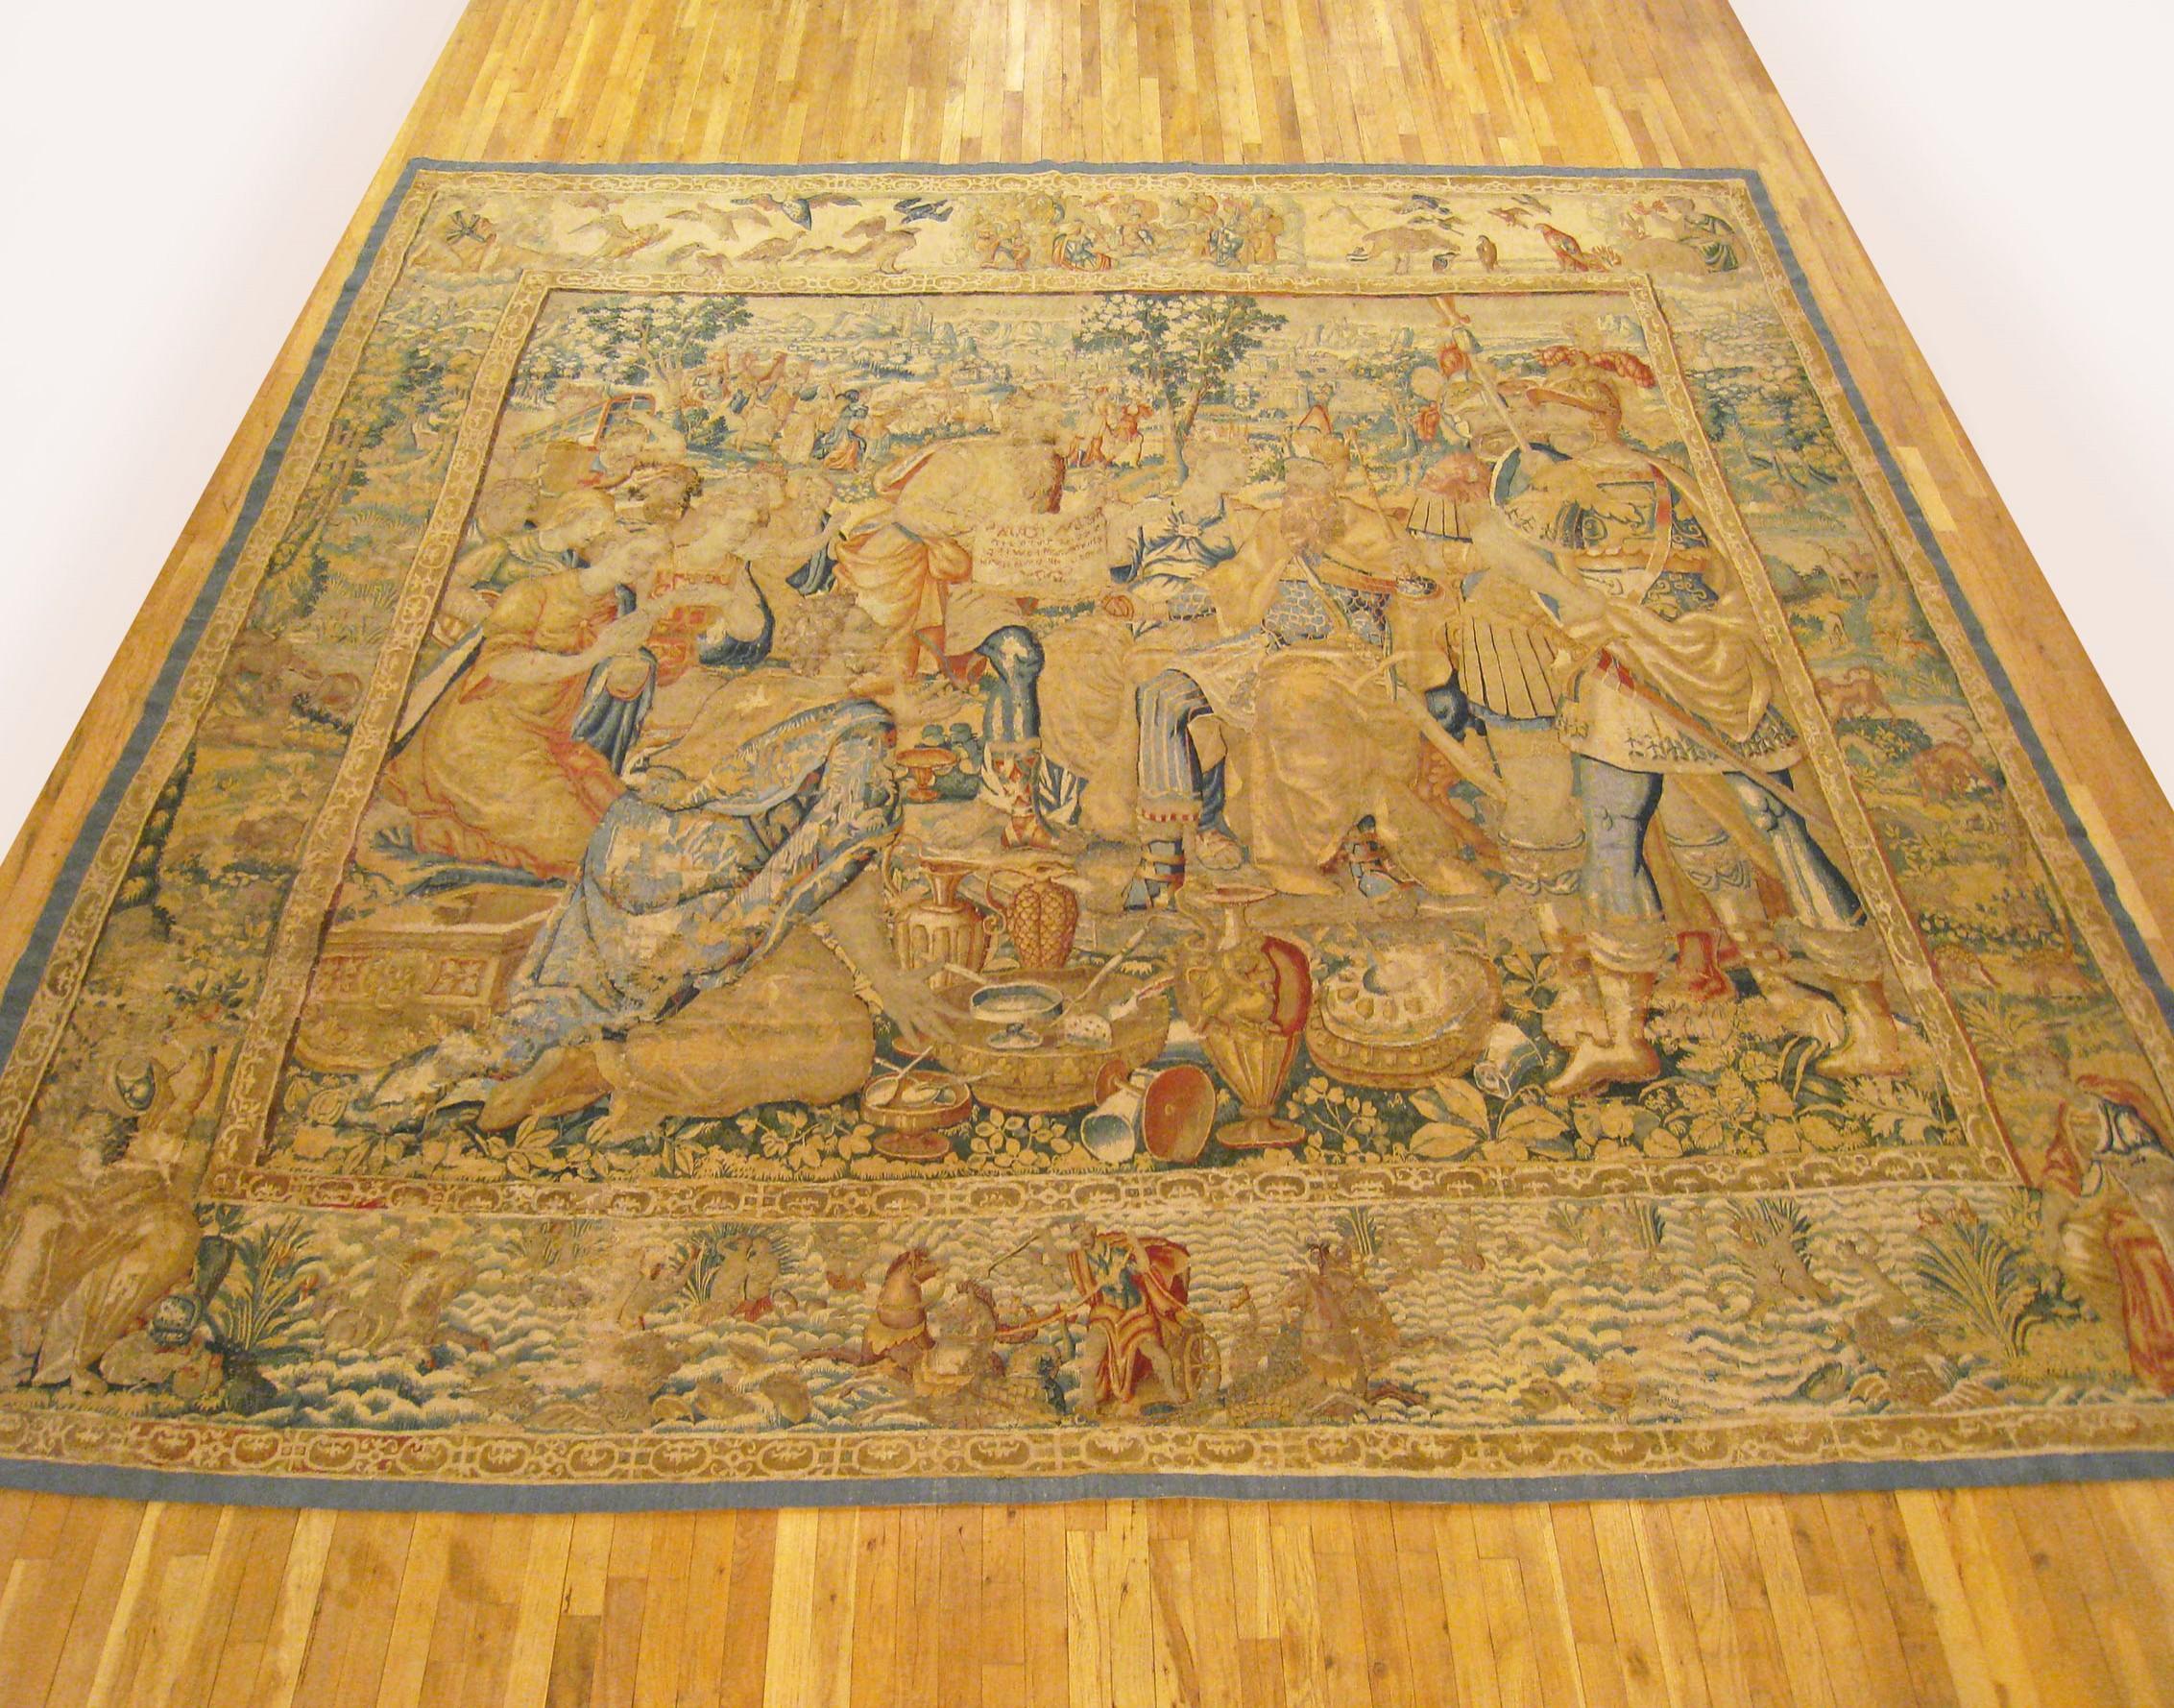 A Brussels historical tapestry, attributed to Martin Reymbouts, late 16th century. From the Story of Scipio series, the renowned Roman general, victorious after the Punic War, with king and queen enthroned and surrounded by soldiers, people kneeling